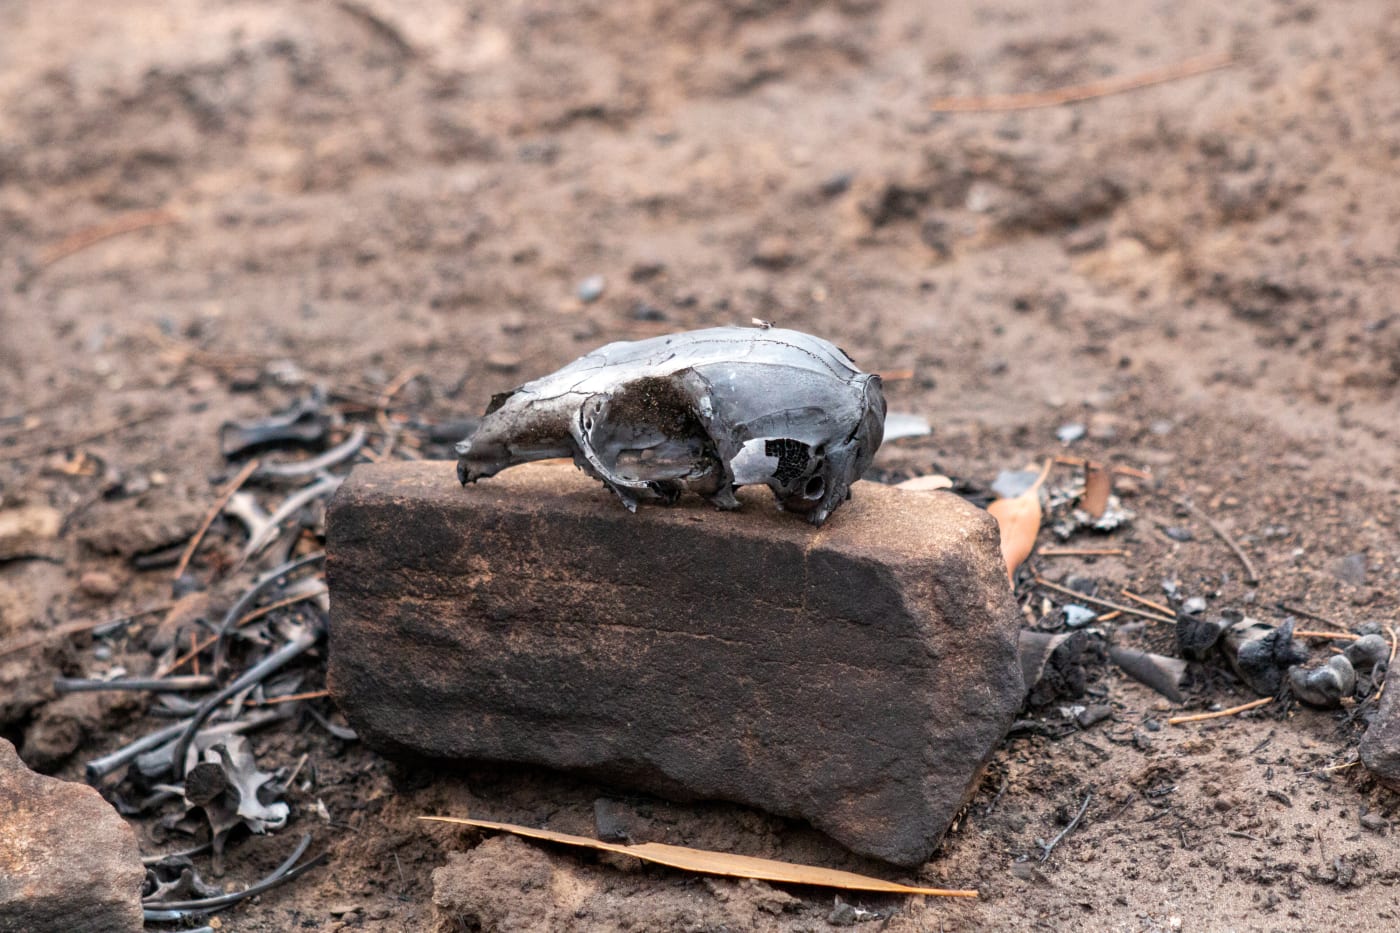 A Tammar wallaby skull found in Lathami Conservation Park after bushfires swept through the area, Kangaroo Island, 2020